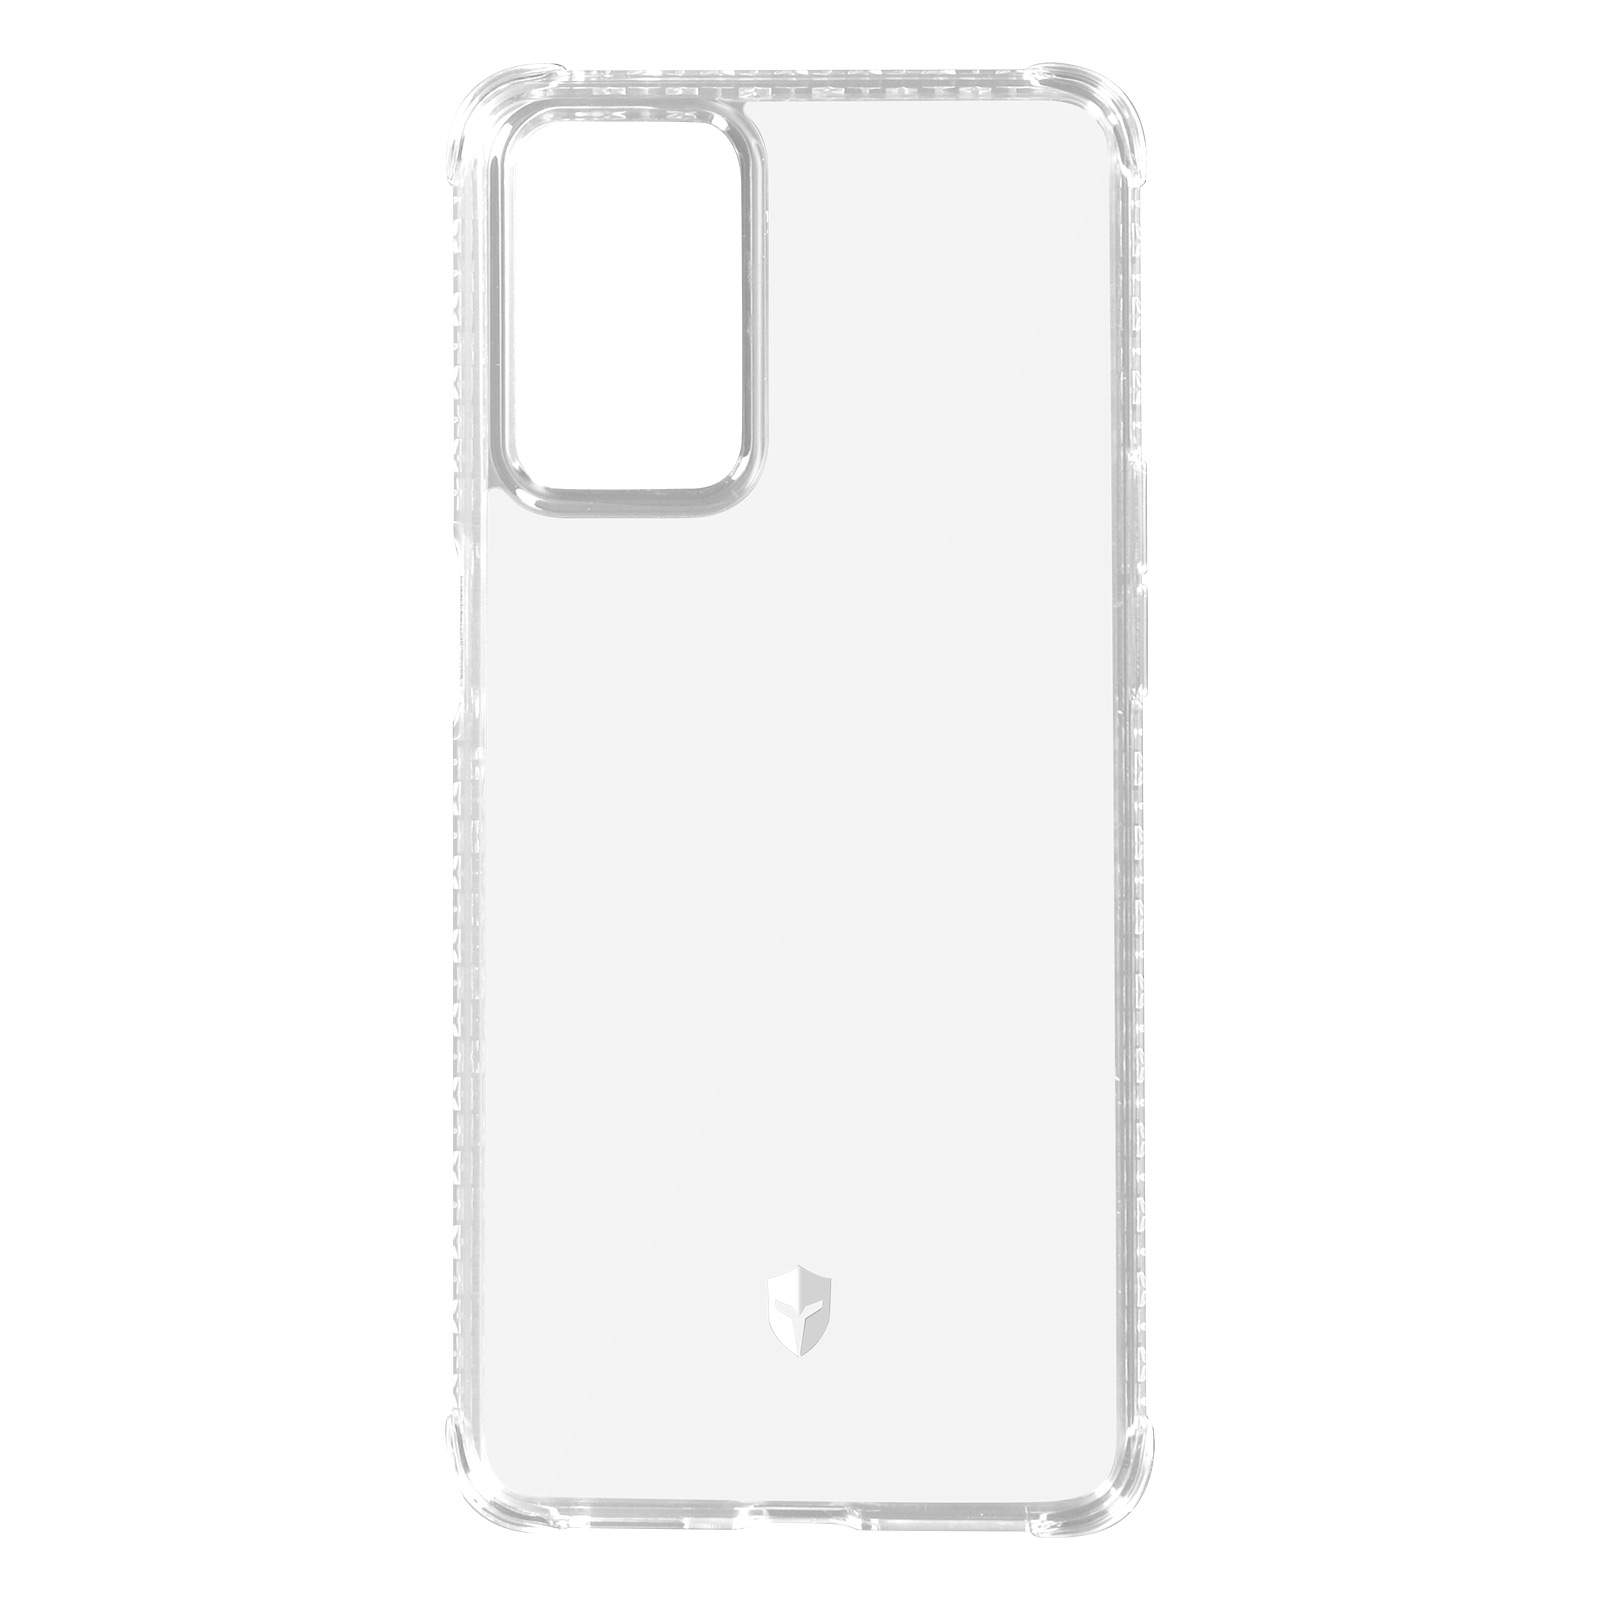 Backcover, Reno Transparent 5G, BIGBEN Oppo, Air Series, 6